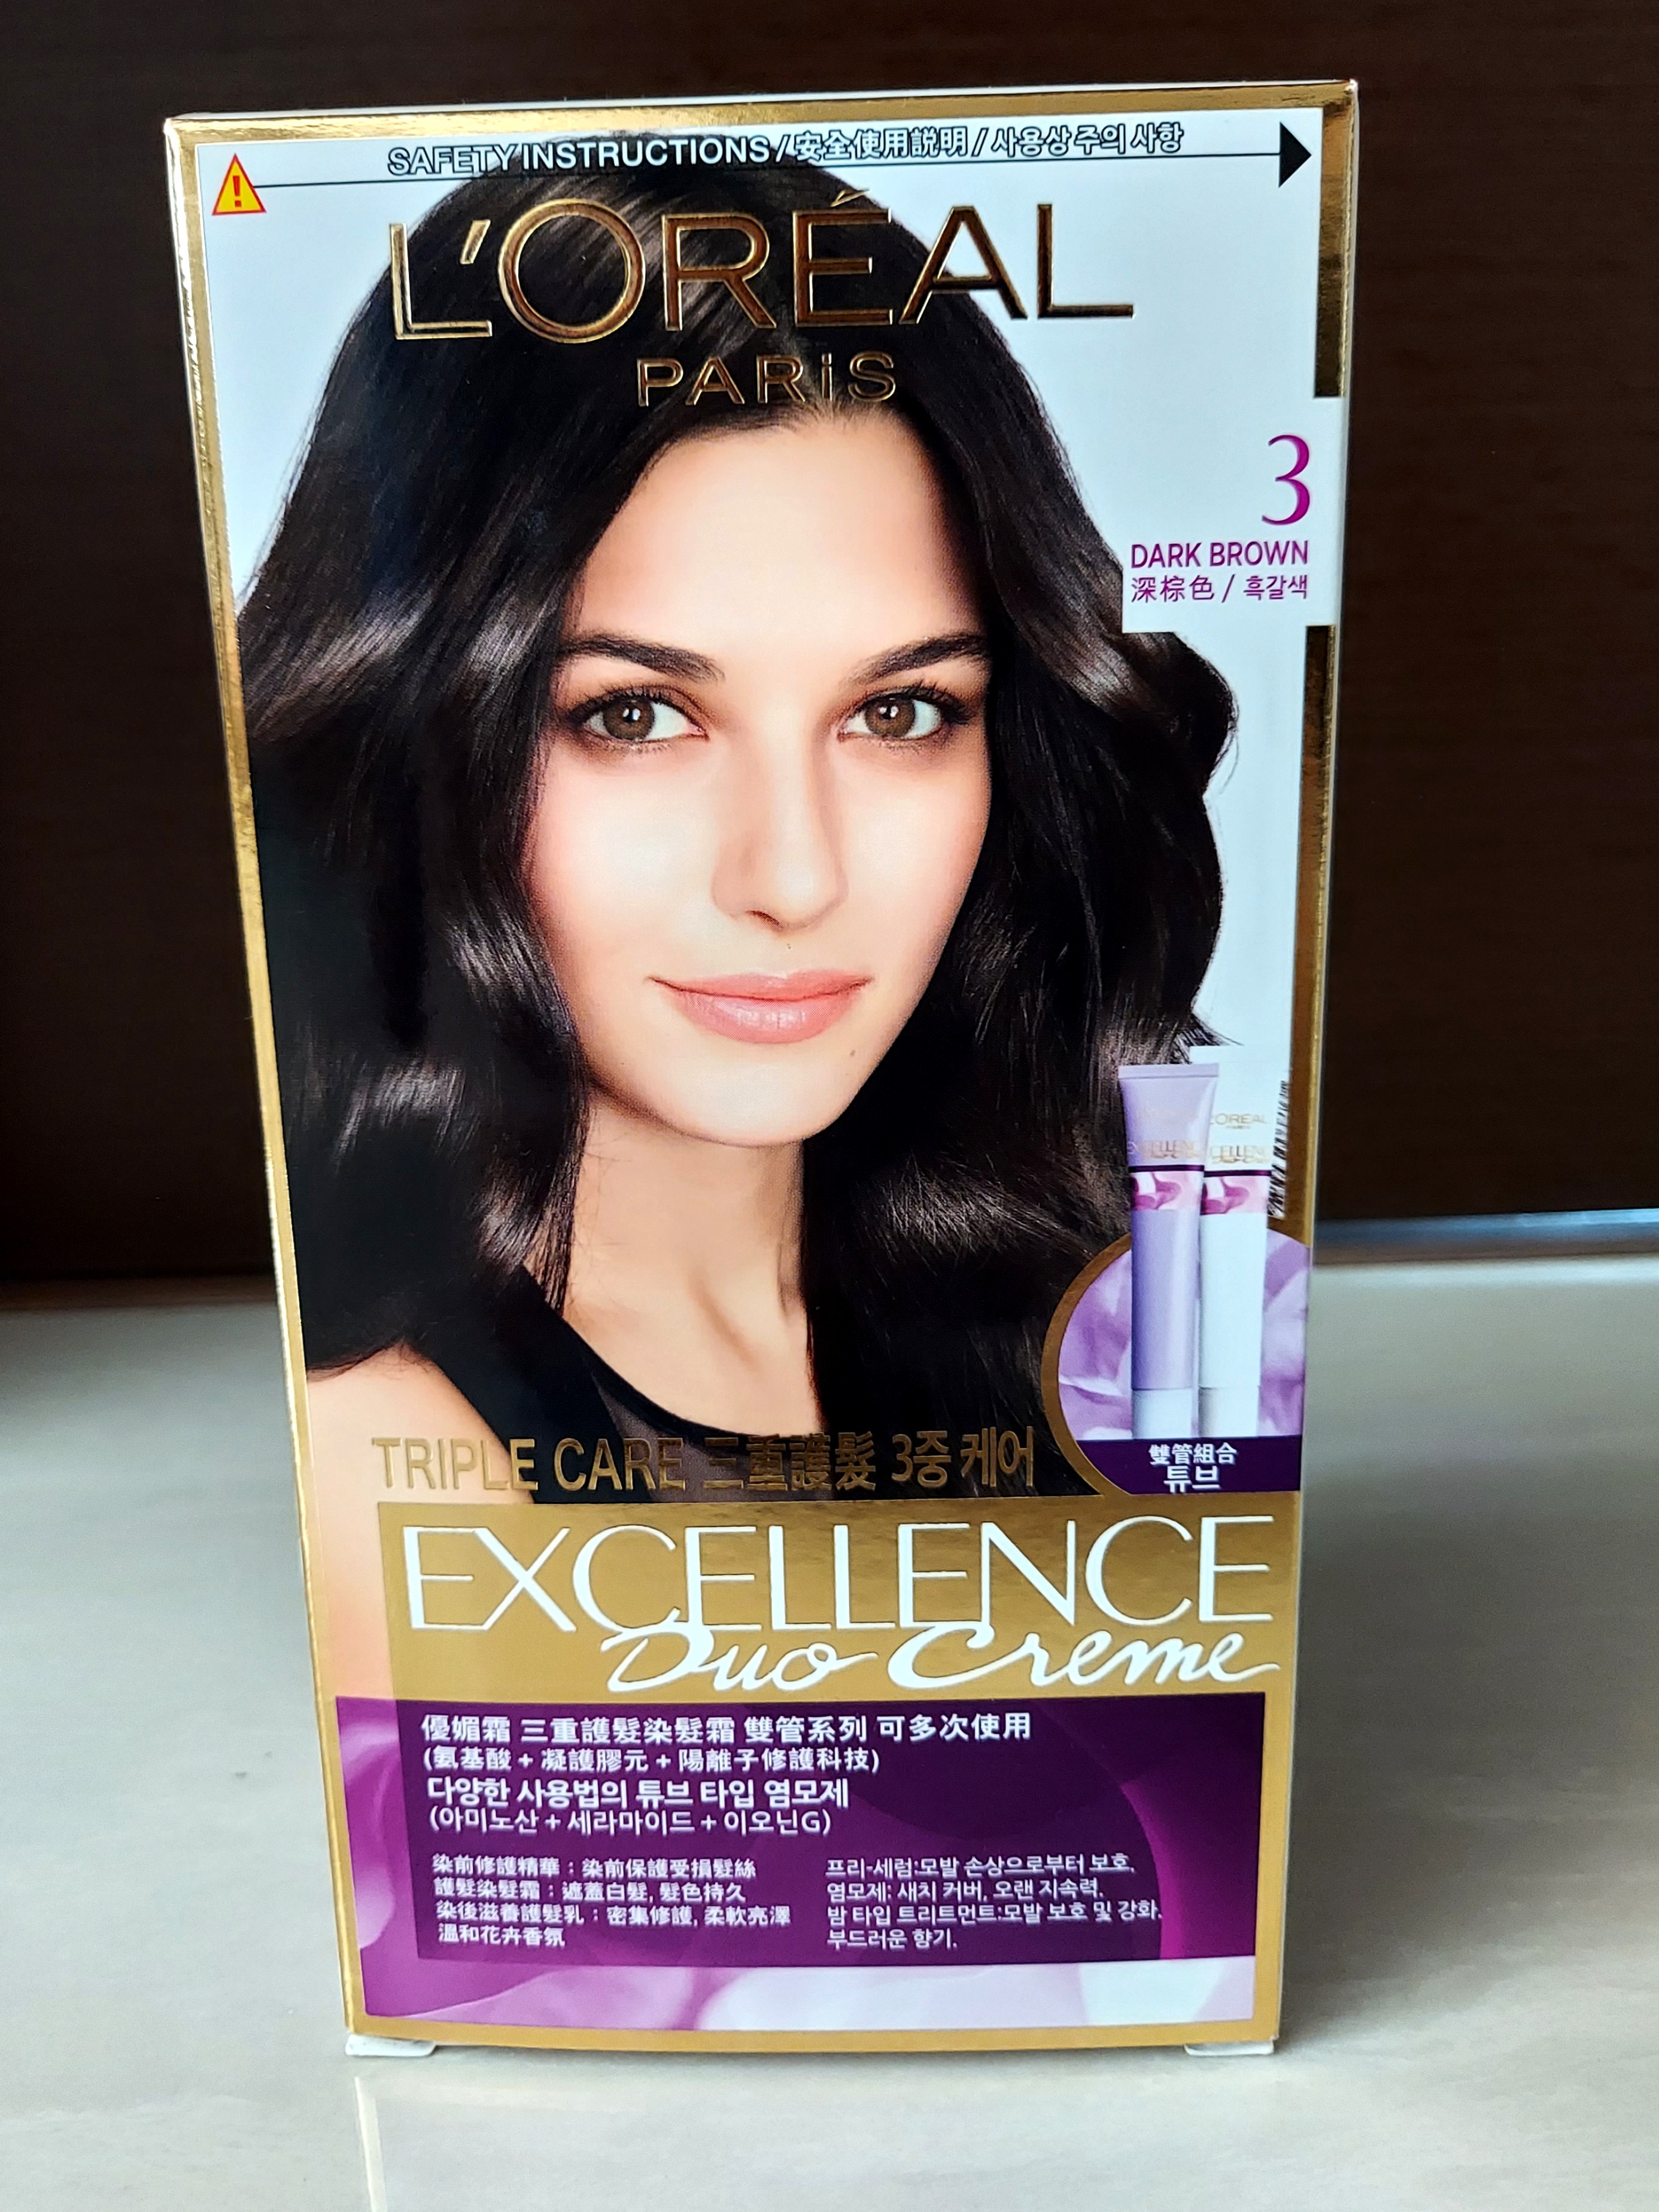 Loreal Paris Hair Dye: Excellence Duo Creme (Triple Care) - Dark Brown 3,  Beauty & Personal Care, Hair on Carousell